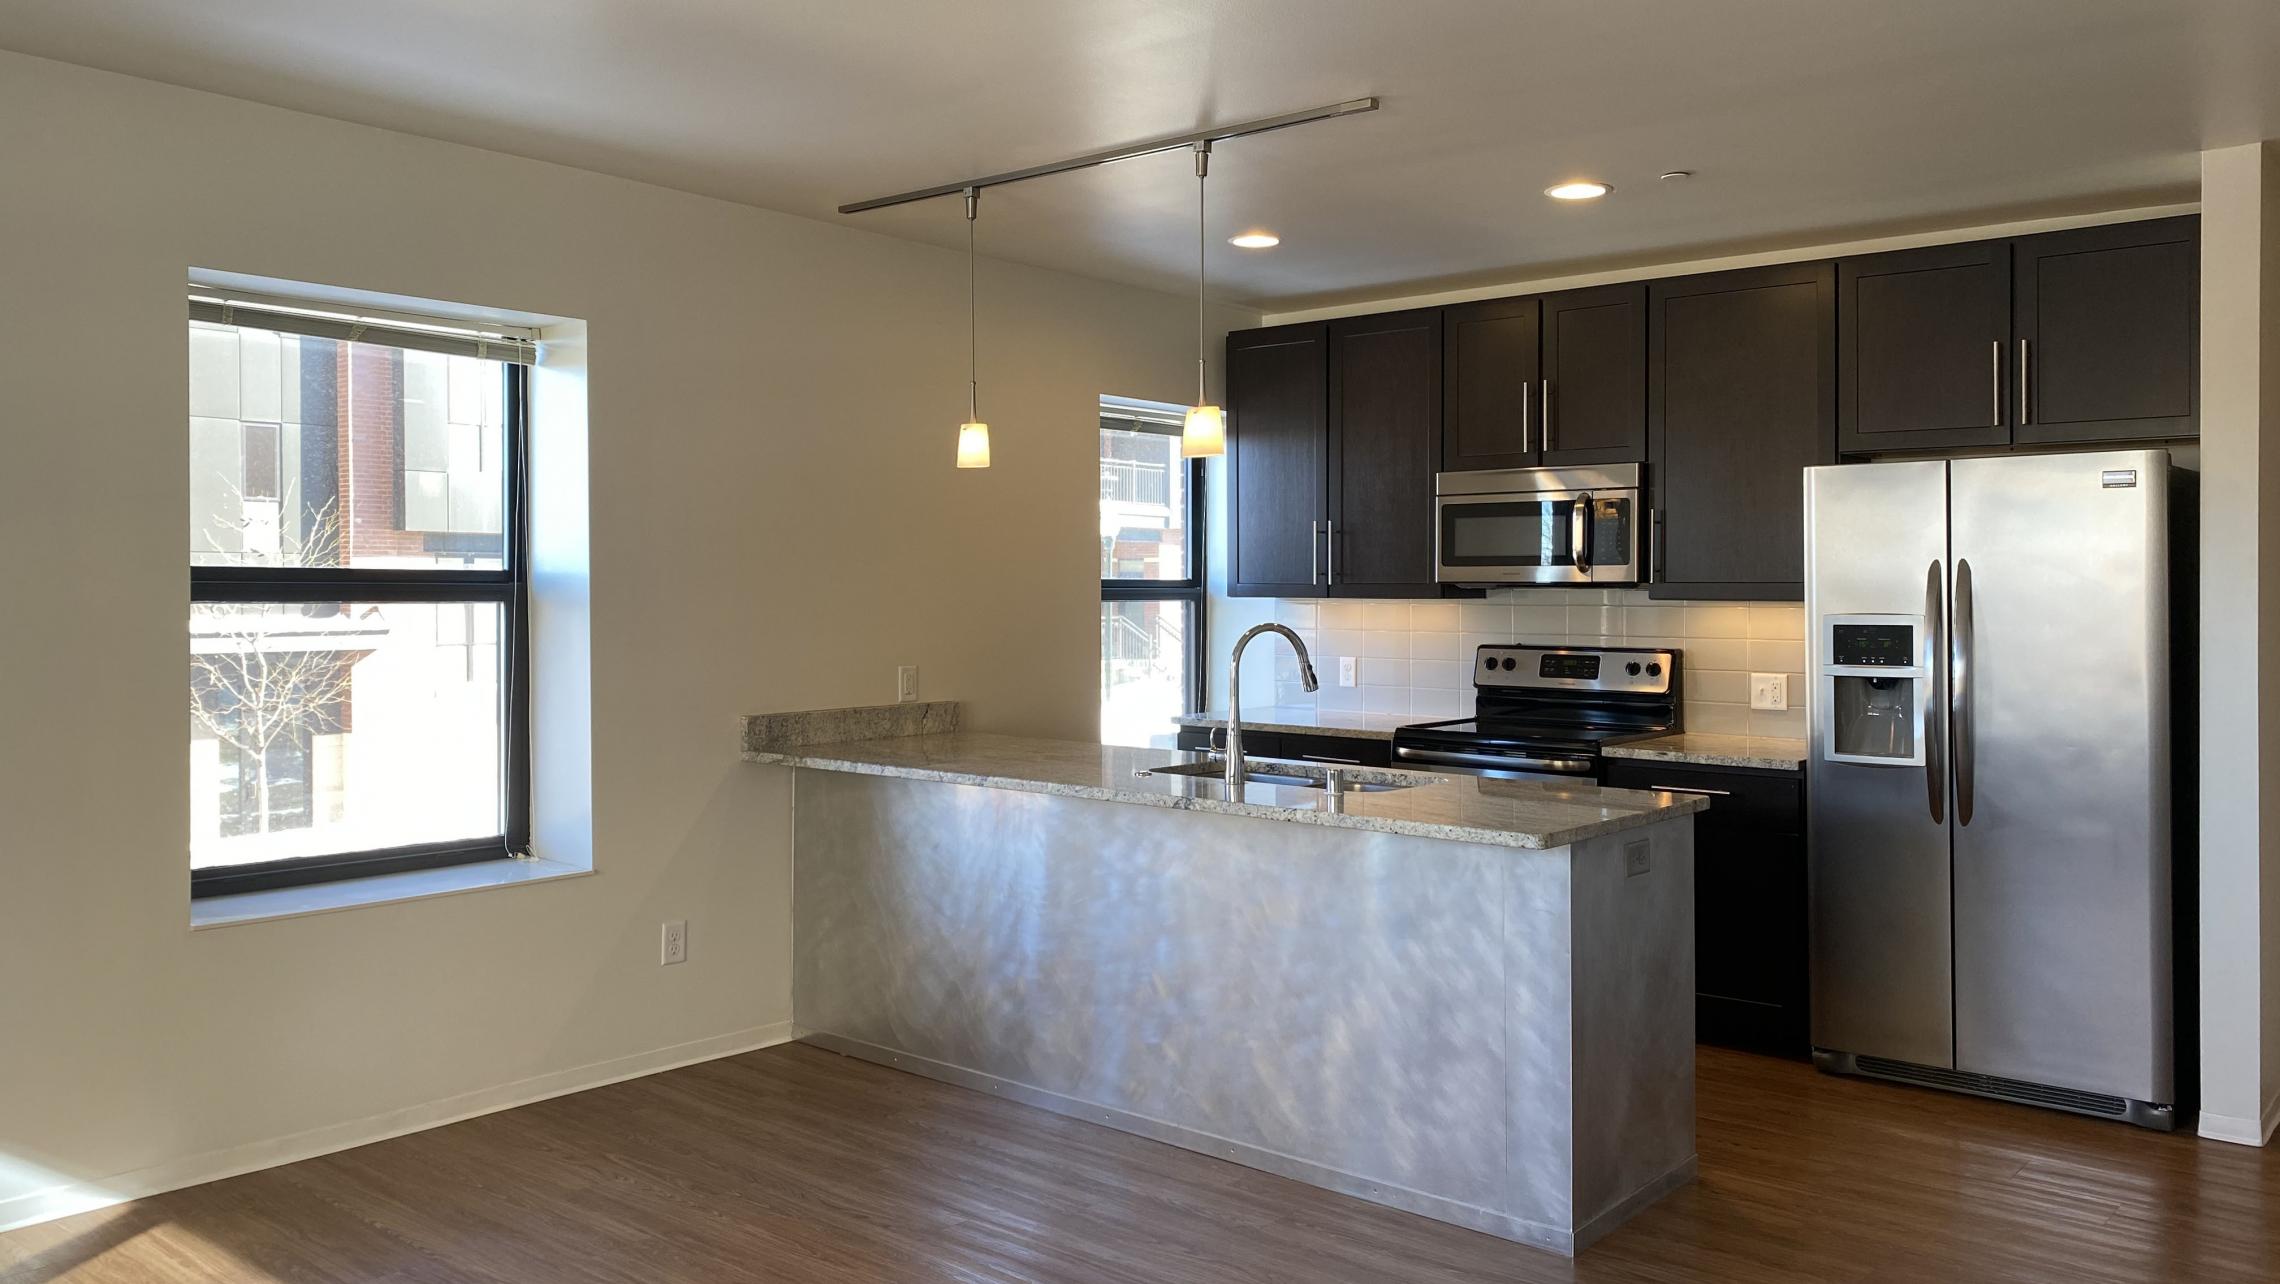 Capitol-Hill-Apartment-201-One-Bedroom-Corner-Downtown-Madison-Capitol-Square-Upscale-Luxury-Modern-Lifestyle-Views-Lake-Cats-Living-Bathroom-Kithcen-Laundry